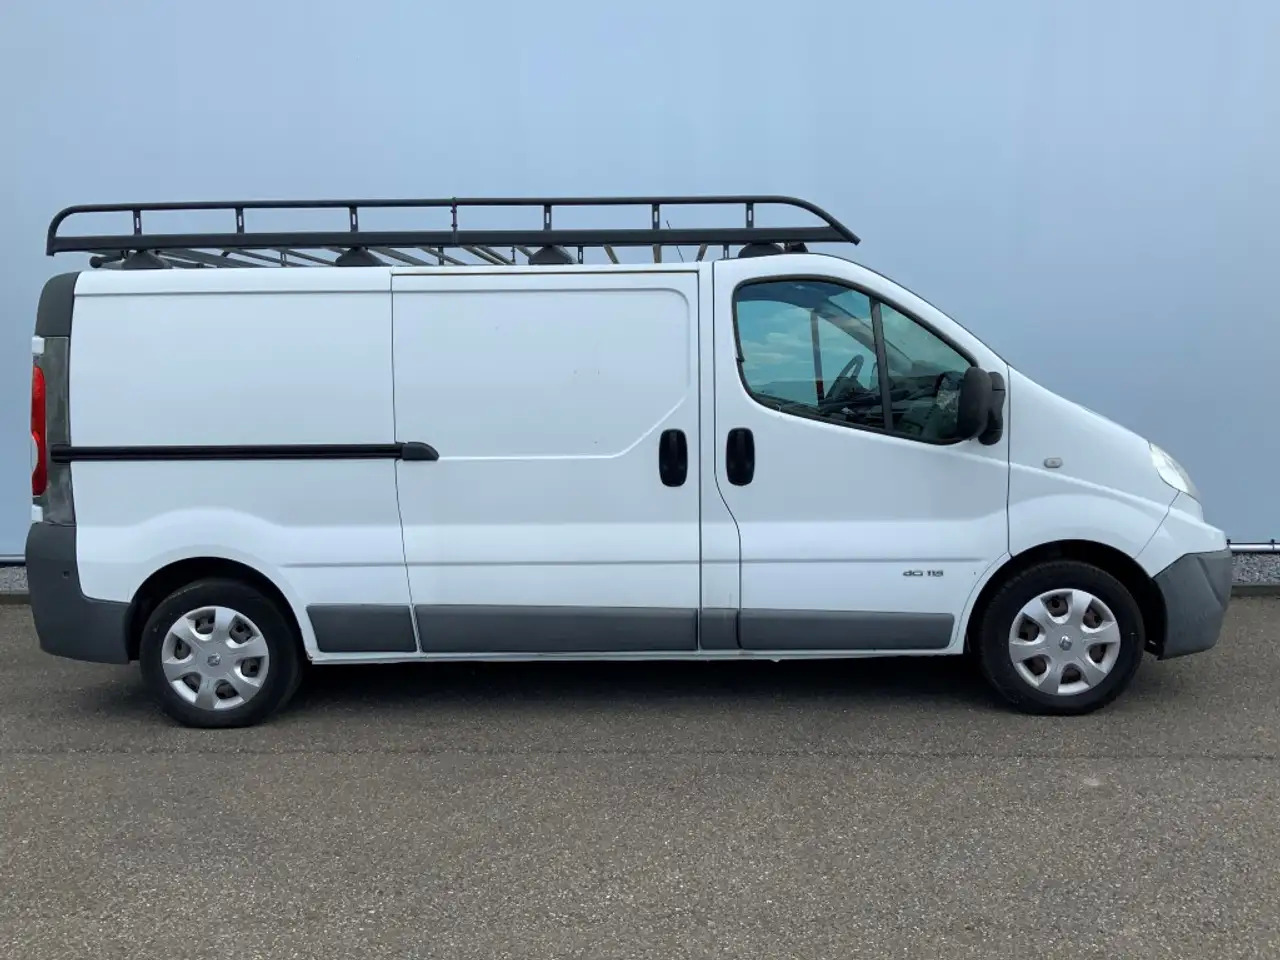 Fourgon utilitaire Renault Trafic 2.0 dCi T29 L2H1 Automaat Airco Navi 3 Zits Imperi: photos 4